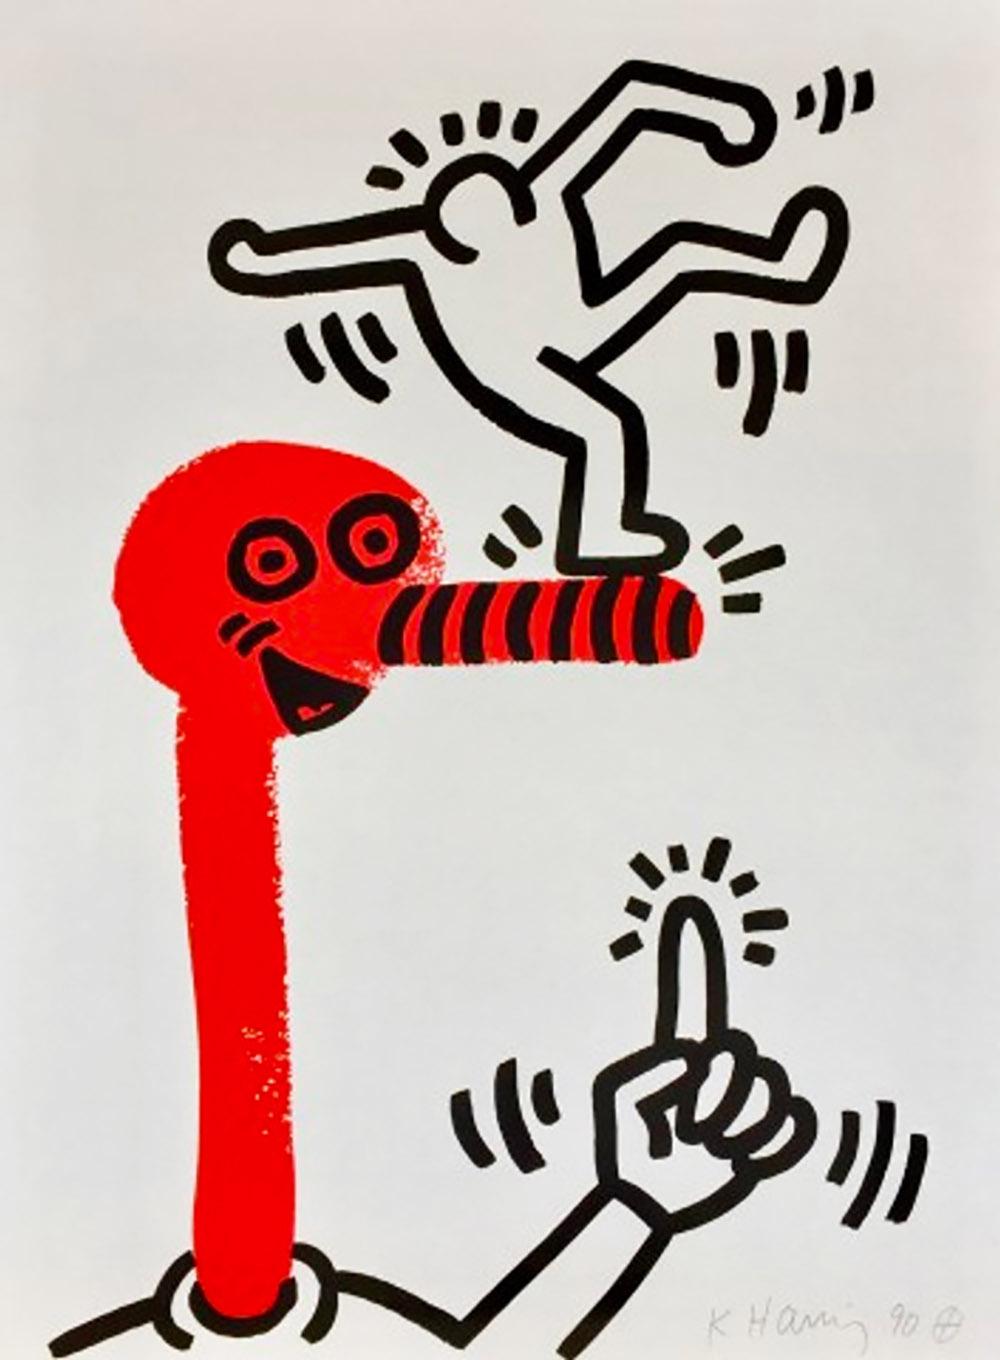 Keith Haring Interior Print - KEITH HARING 'THE STORY OF RED AND BLUE - 1', 1989, SIGNED & NUMBERED